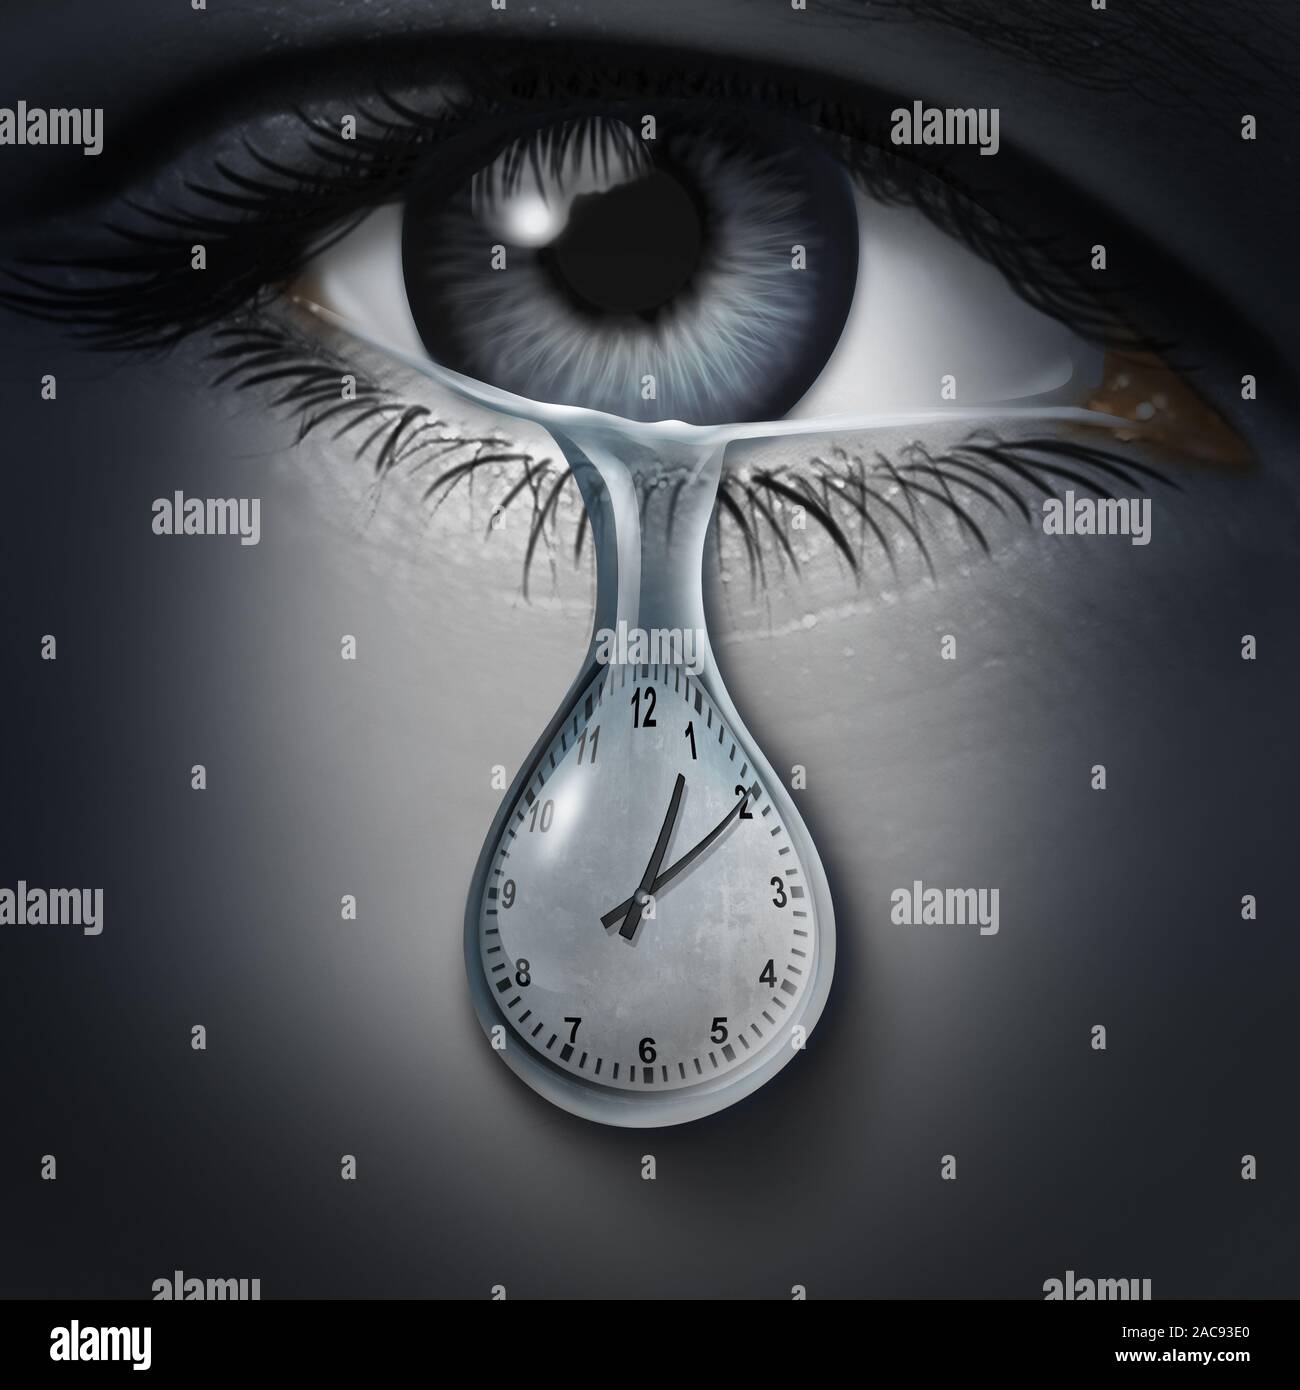 Time anxiety psychology and mental health disorder caused by the fear of death and being late or feelings and emotional distress. Stock Photo